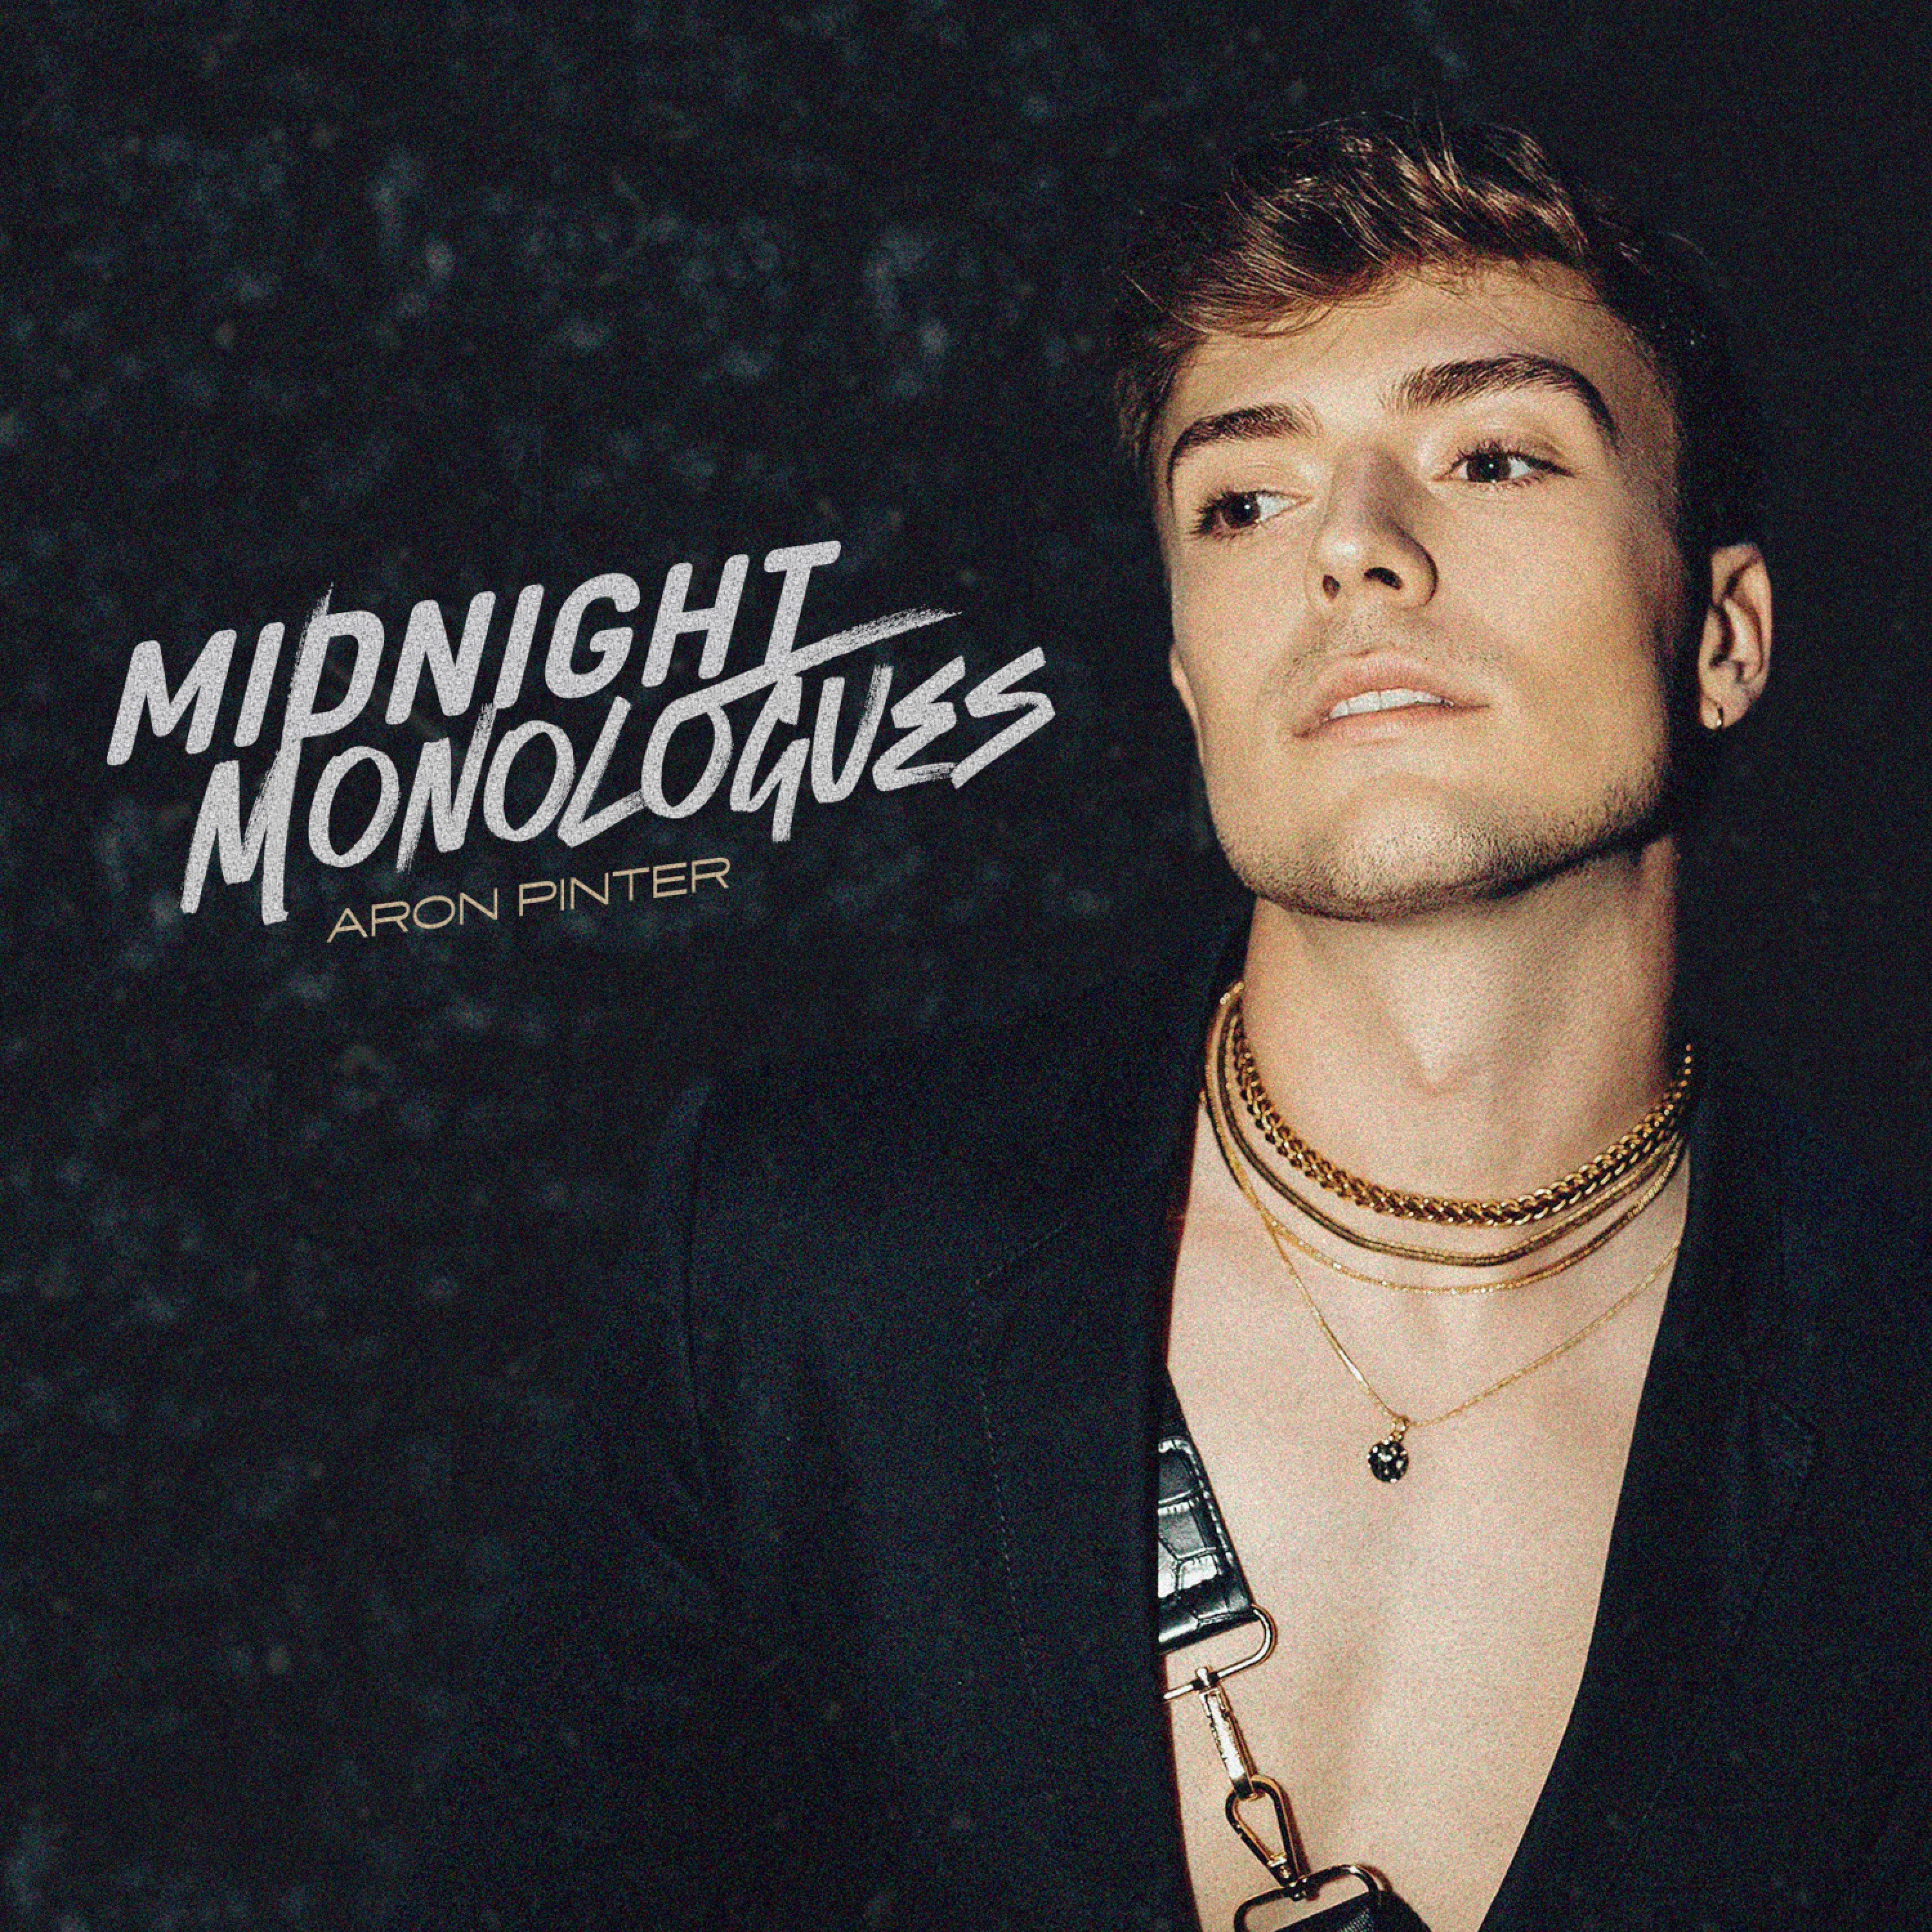 Midnight Monologues